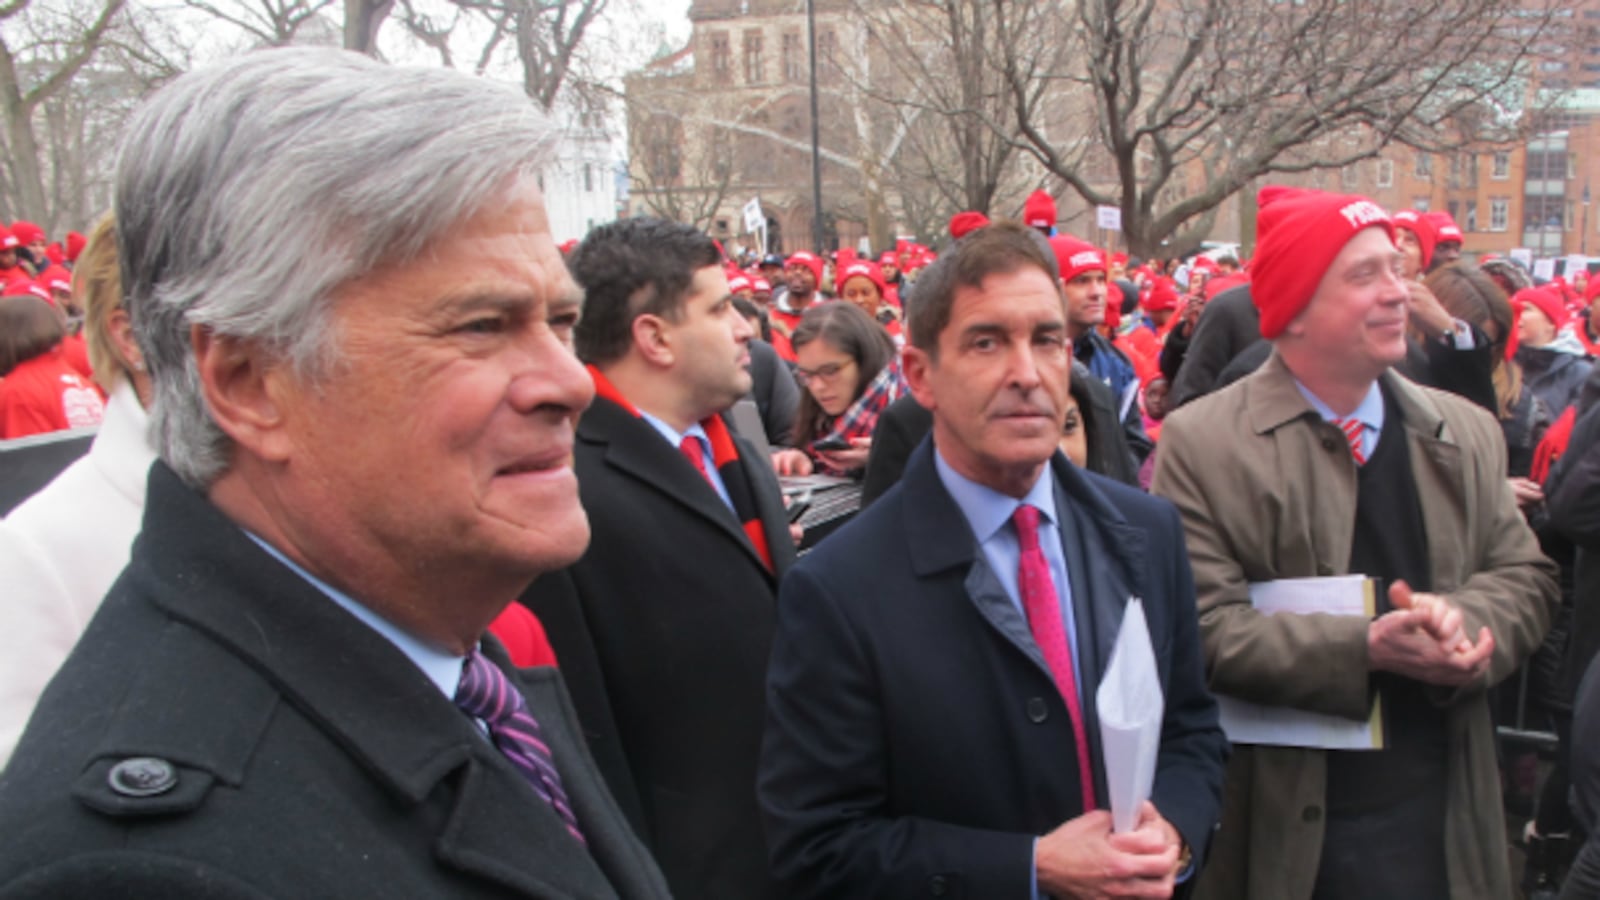 N.Y. State Sen. Jeff Klein, seen at the right at a 2015 charter rally in Albany, lost his primary election in 2018.